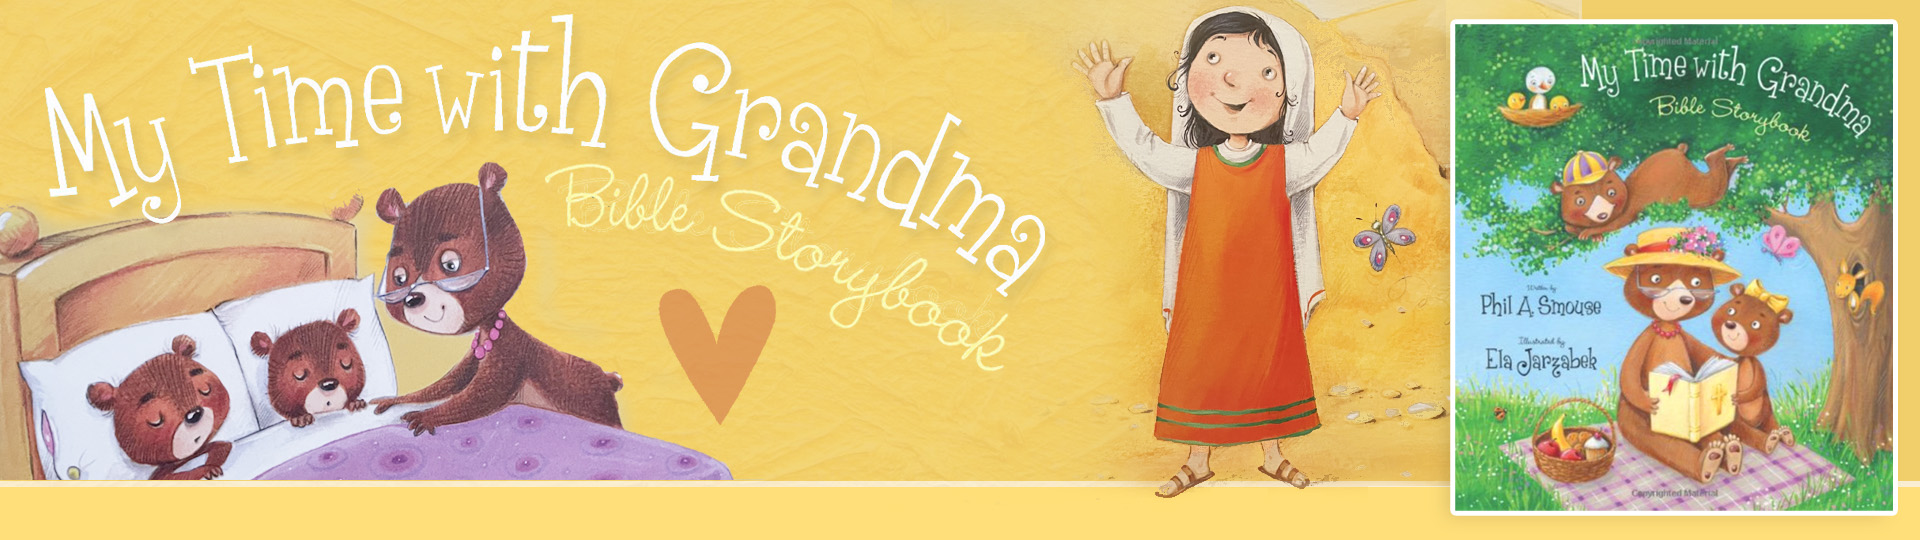 My Time With Grandma Bible Storybook - Phil A. Smouse and Ela Jarzabek